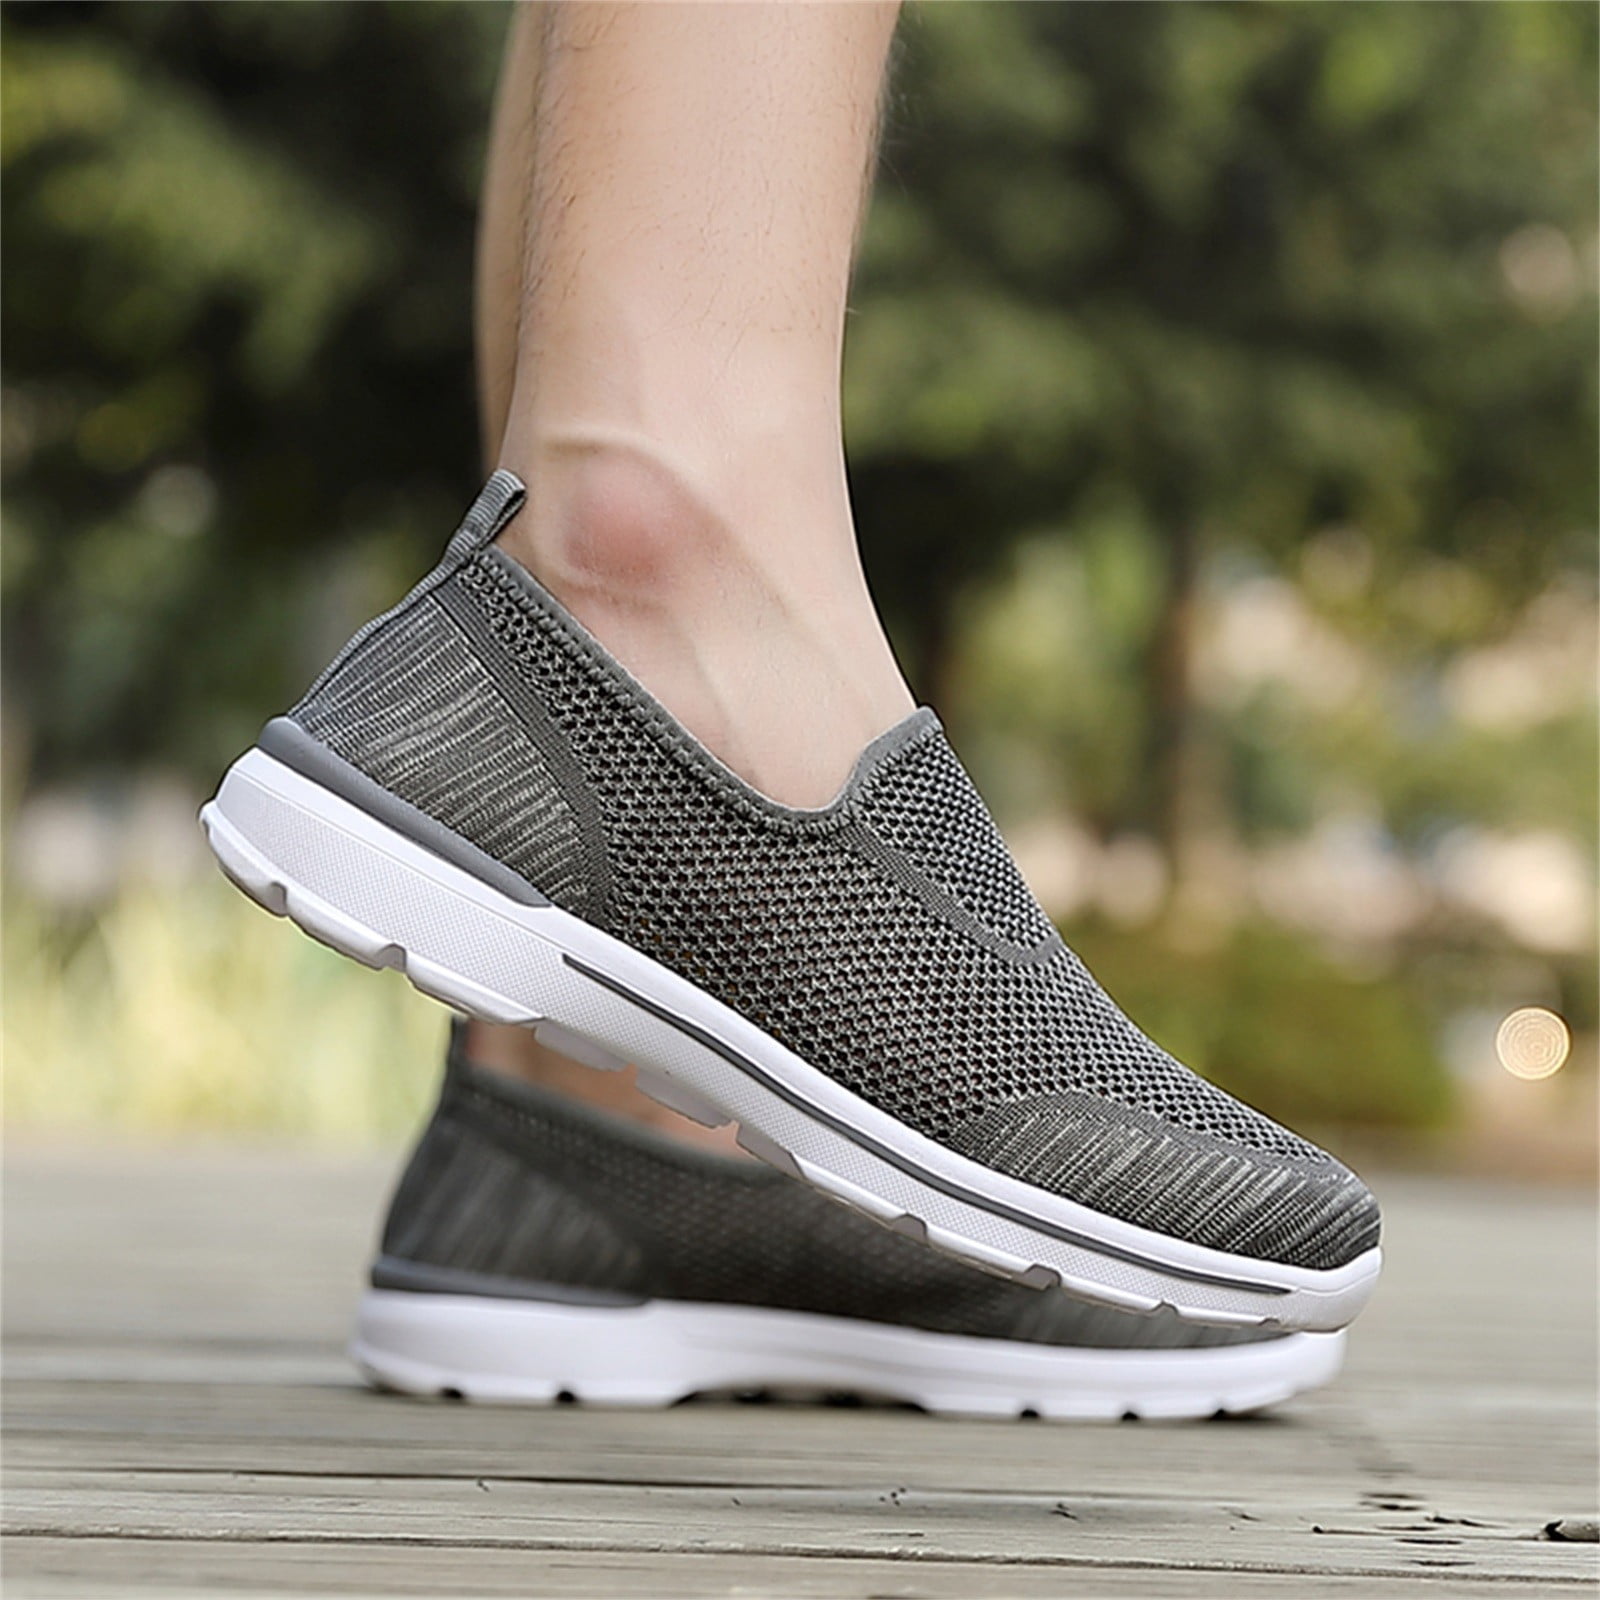 Best Laceless Sneakers Review: Top Five Brands & Styles